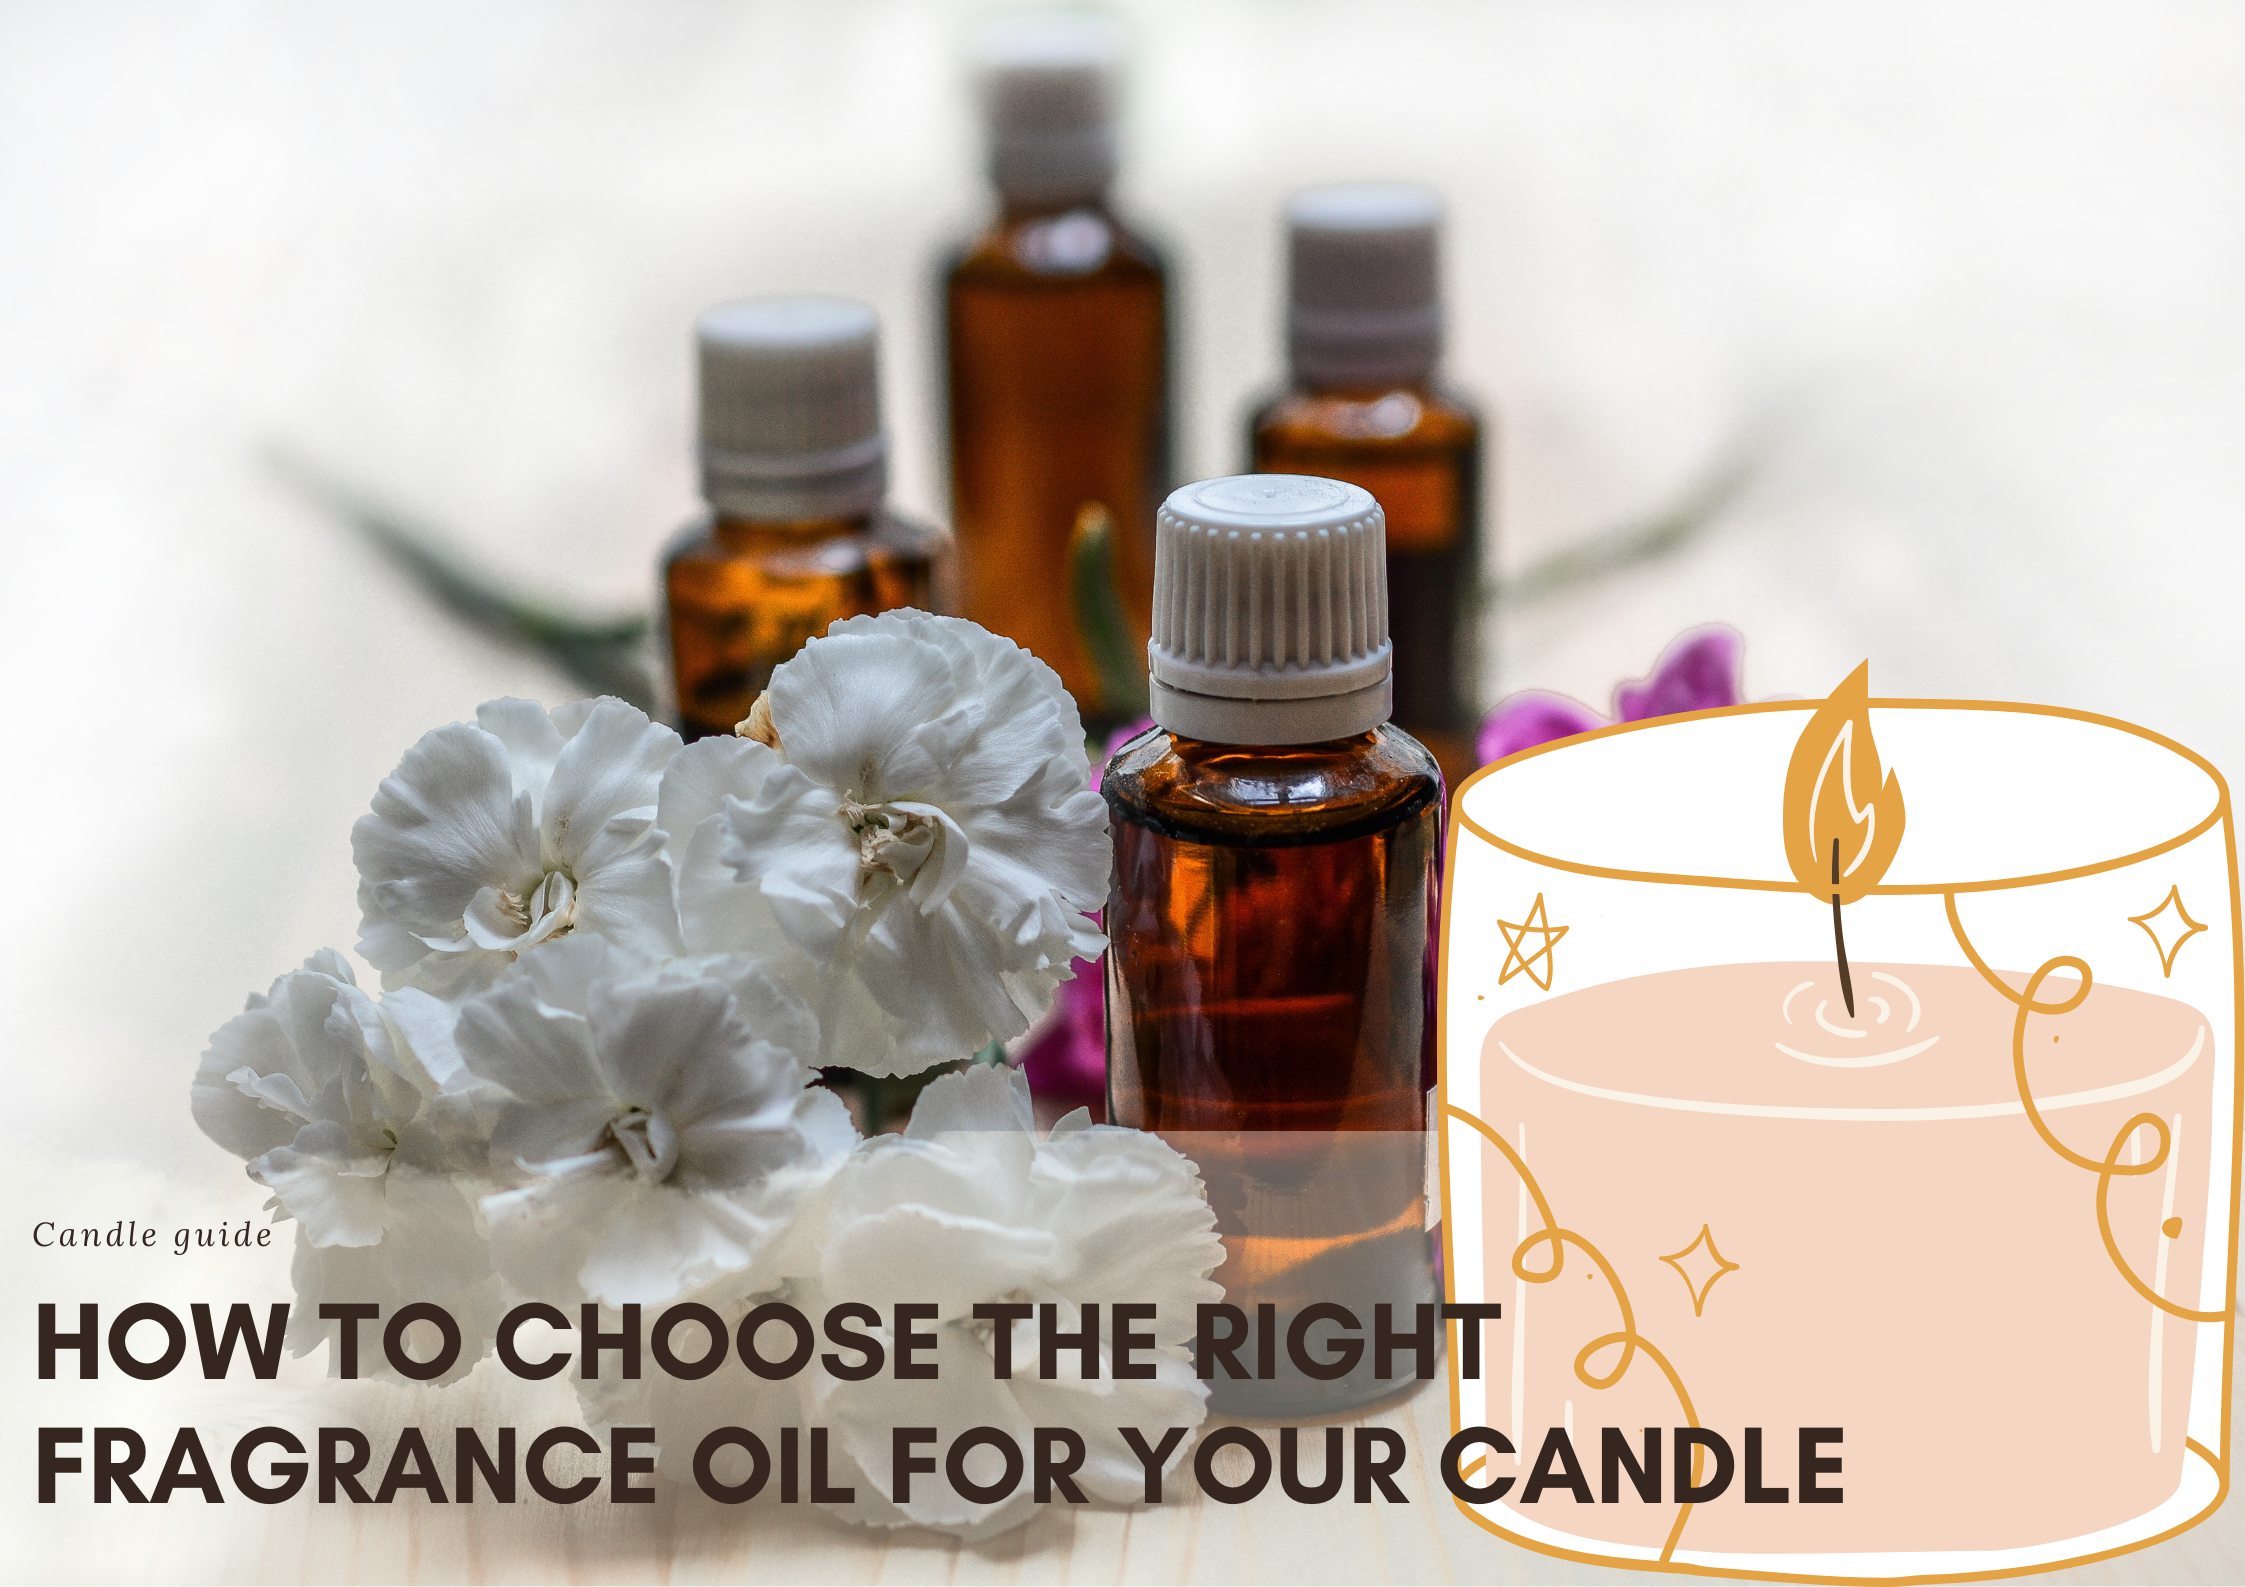 How to choose the right fragrance oil for your candle